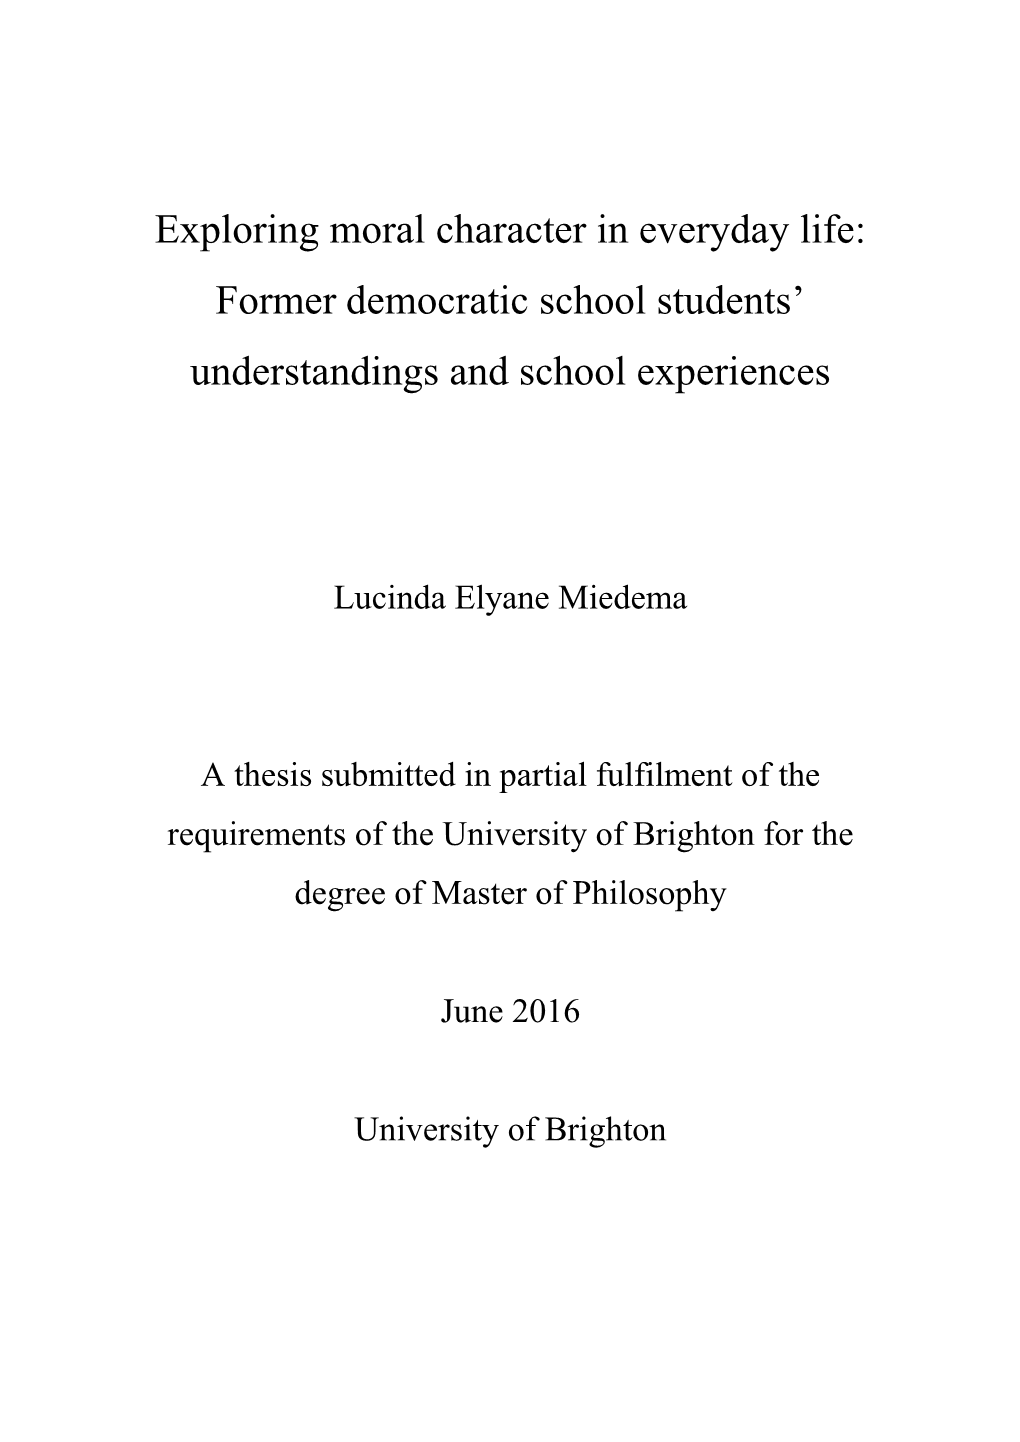 Exploring Former Democratic School Students' Moral Character in Everyday Life